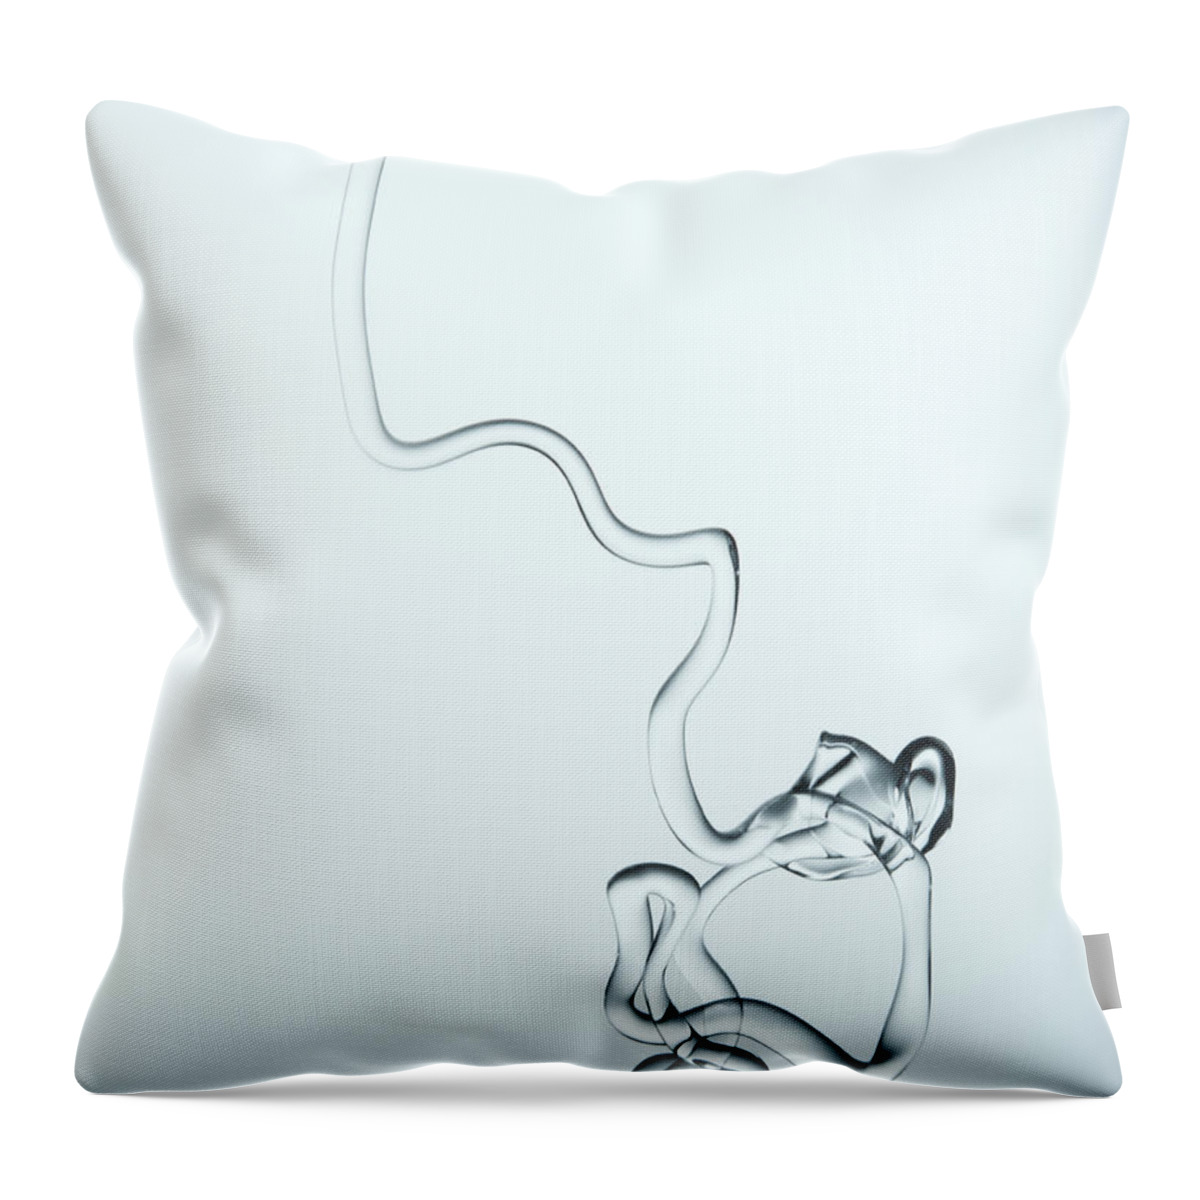 Underwater Throw Pillow featuring the photograph Liquid Stream In Water by Paul Taylor